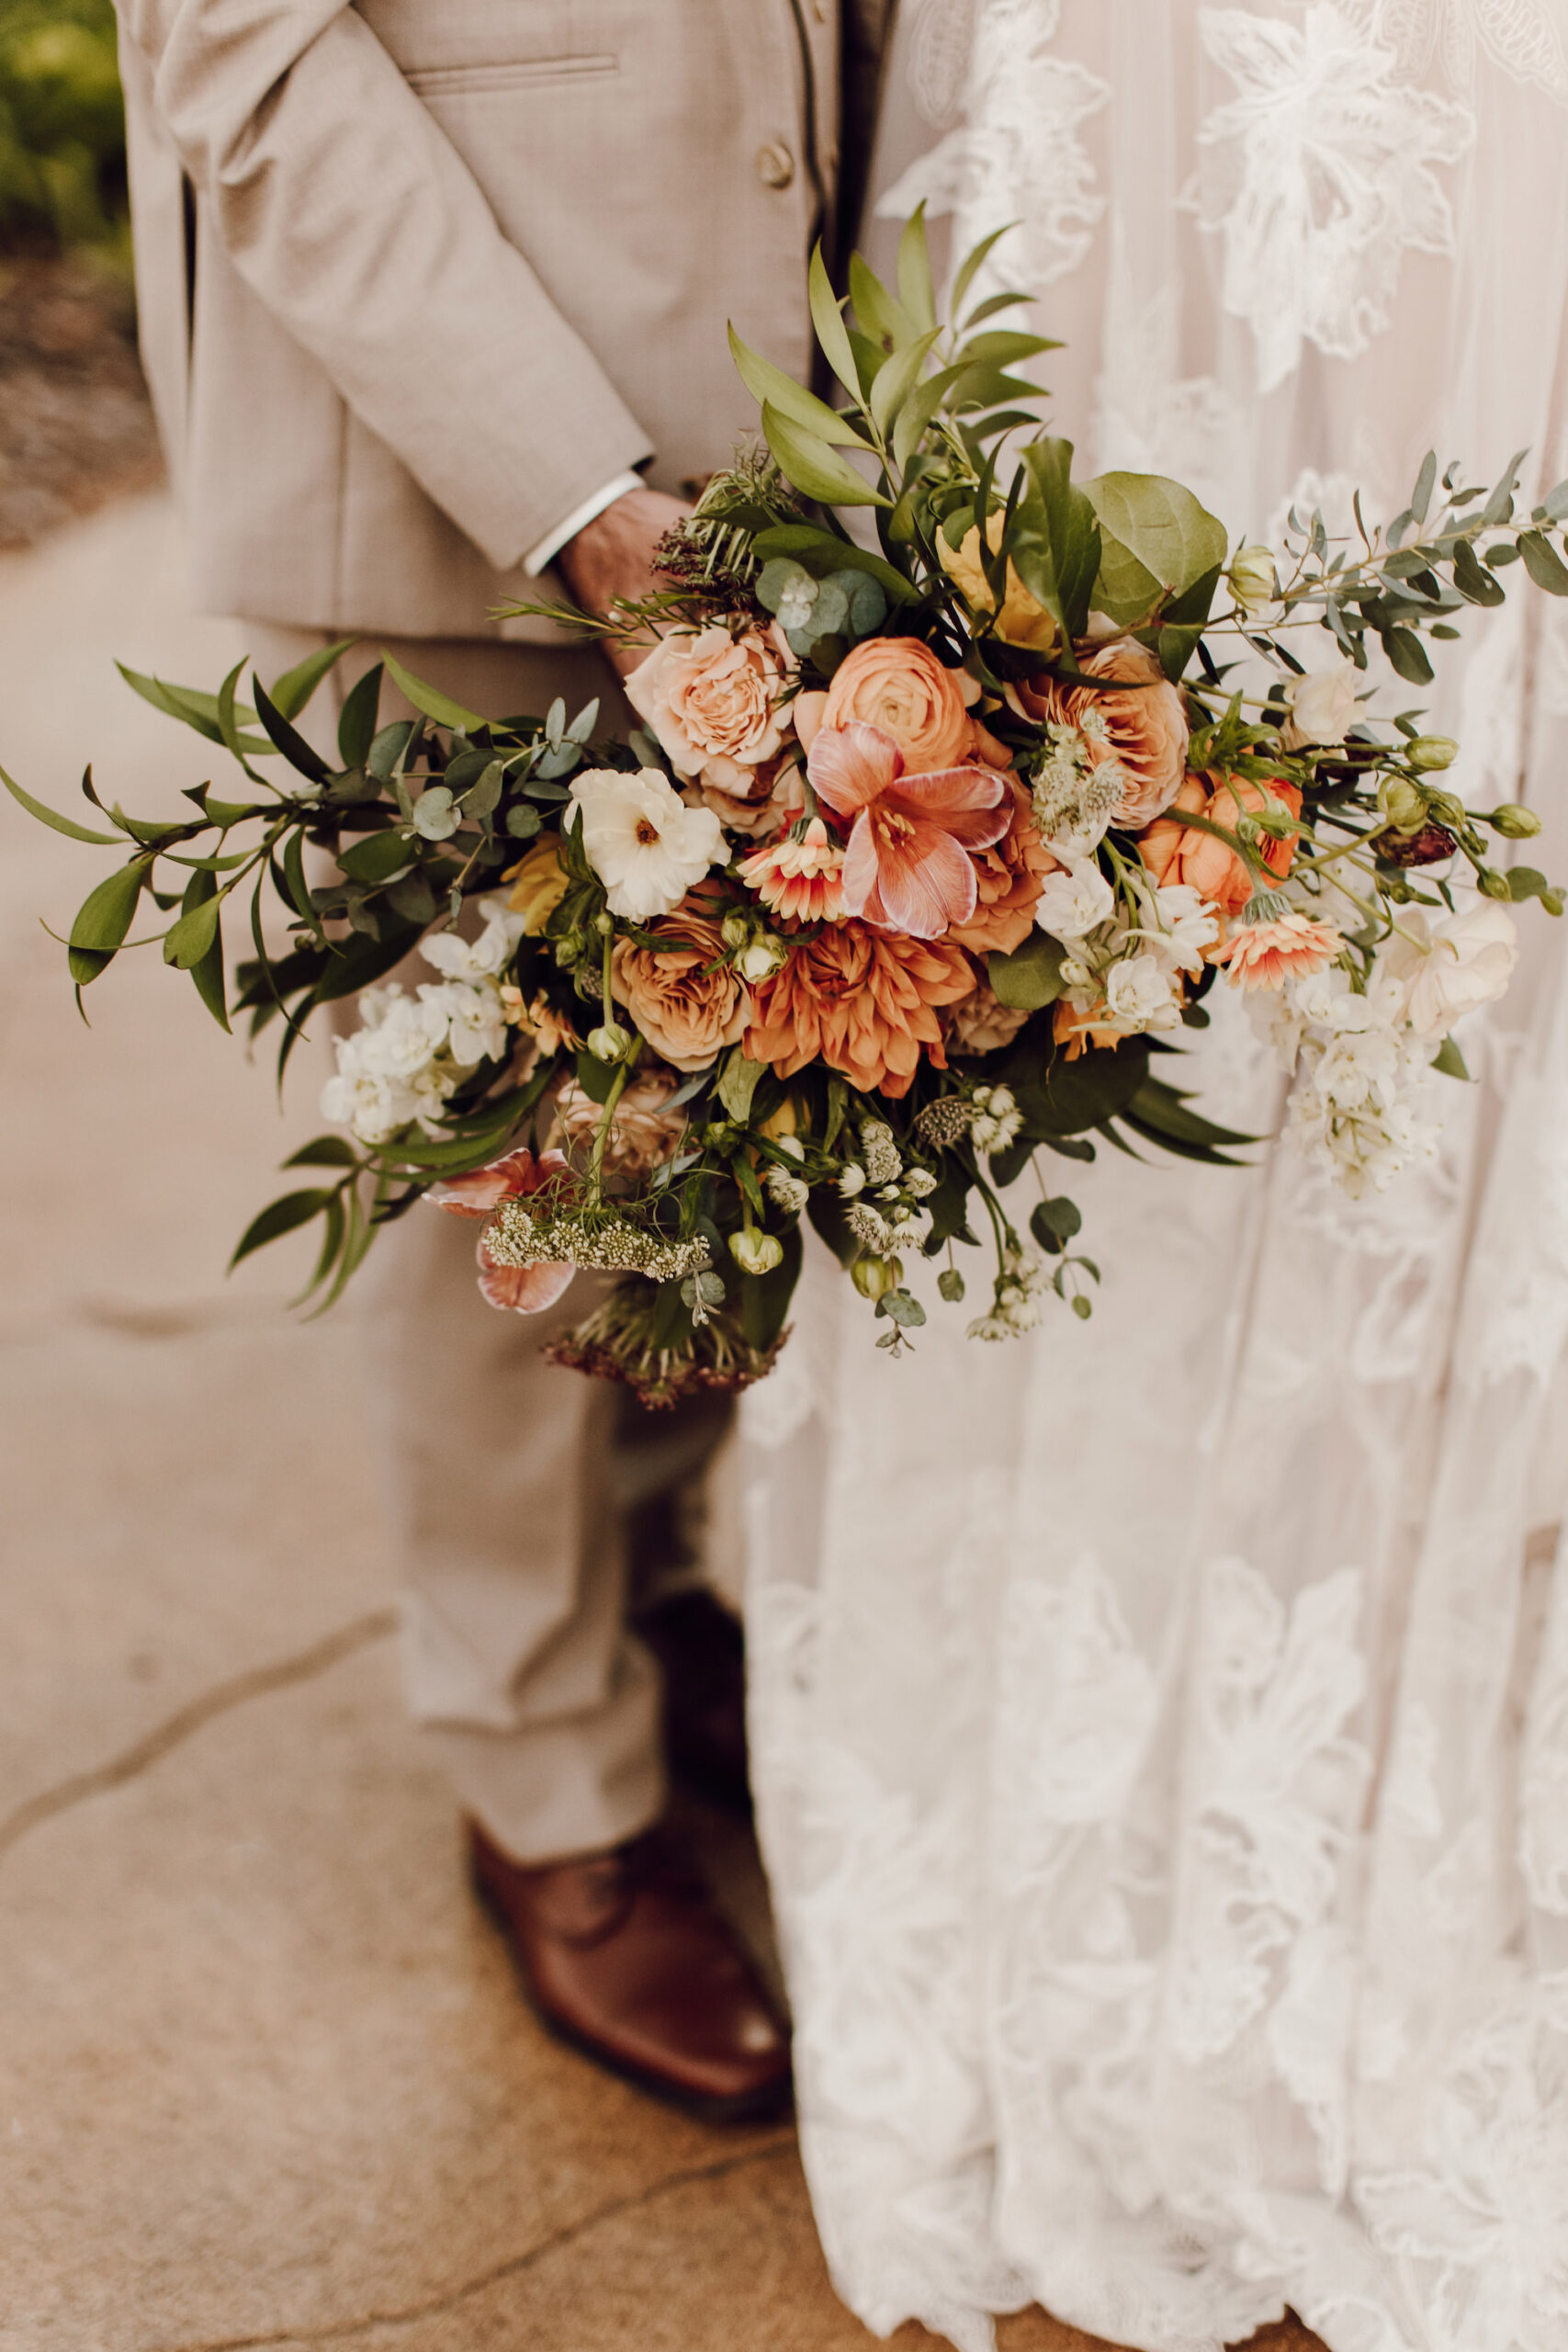 Orange, Peach, and White Flowers with Ruscus Greenery Bridal Wedding Bouquet Wedding Ideas